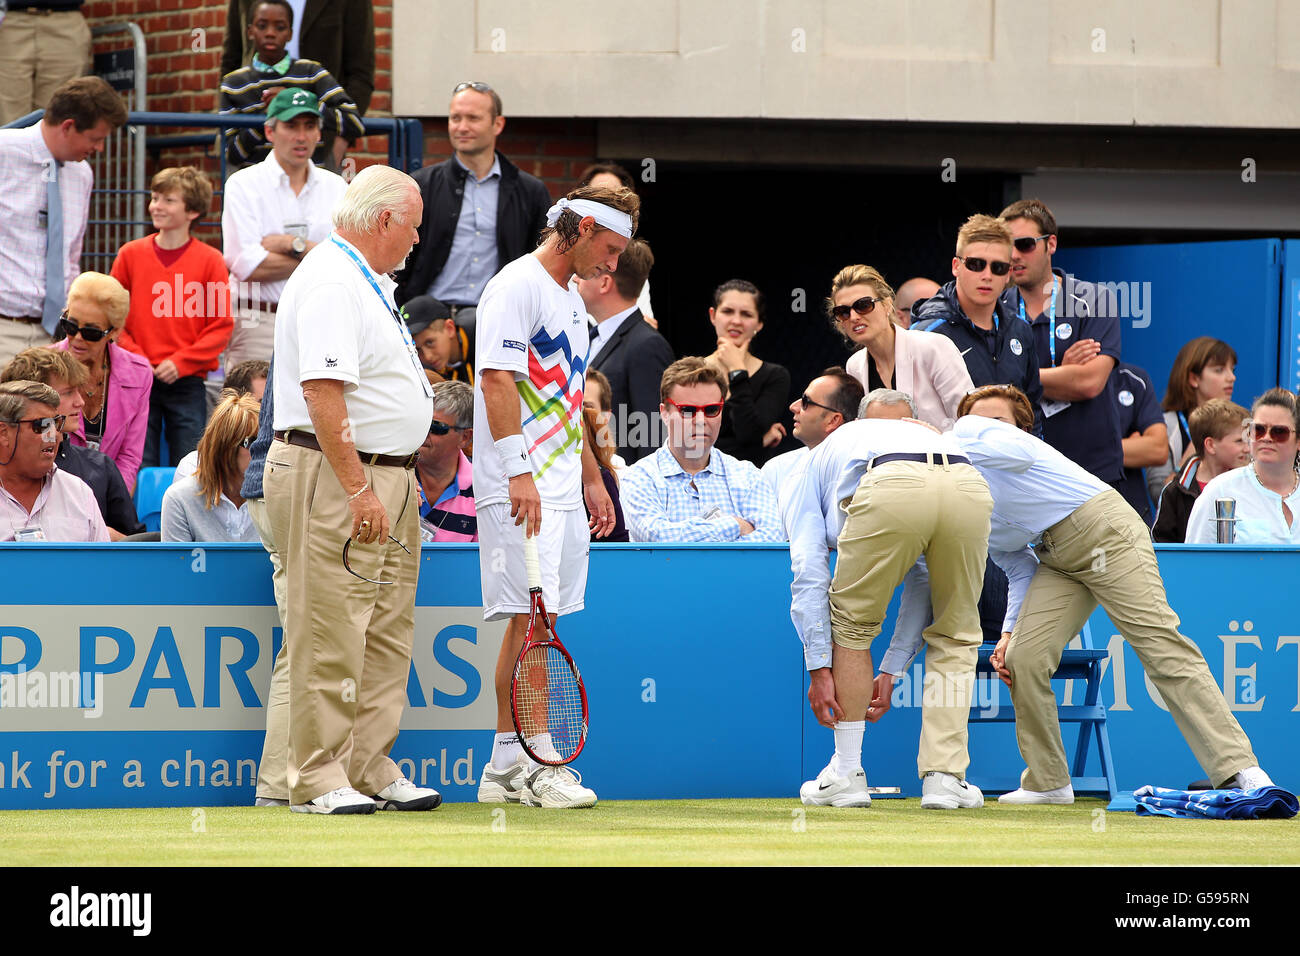 Argentina's David Nalbandian (centre left) loses the match by default after an incident involving a line judge (centre right) needing medical treatment for a cut to the leg during the final on day seven of the AEGON Tennis Championships 2012 at The Queen's Club, London Stock Photo